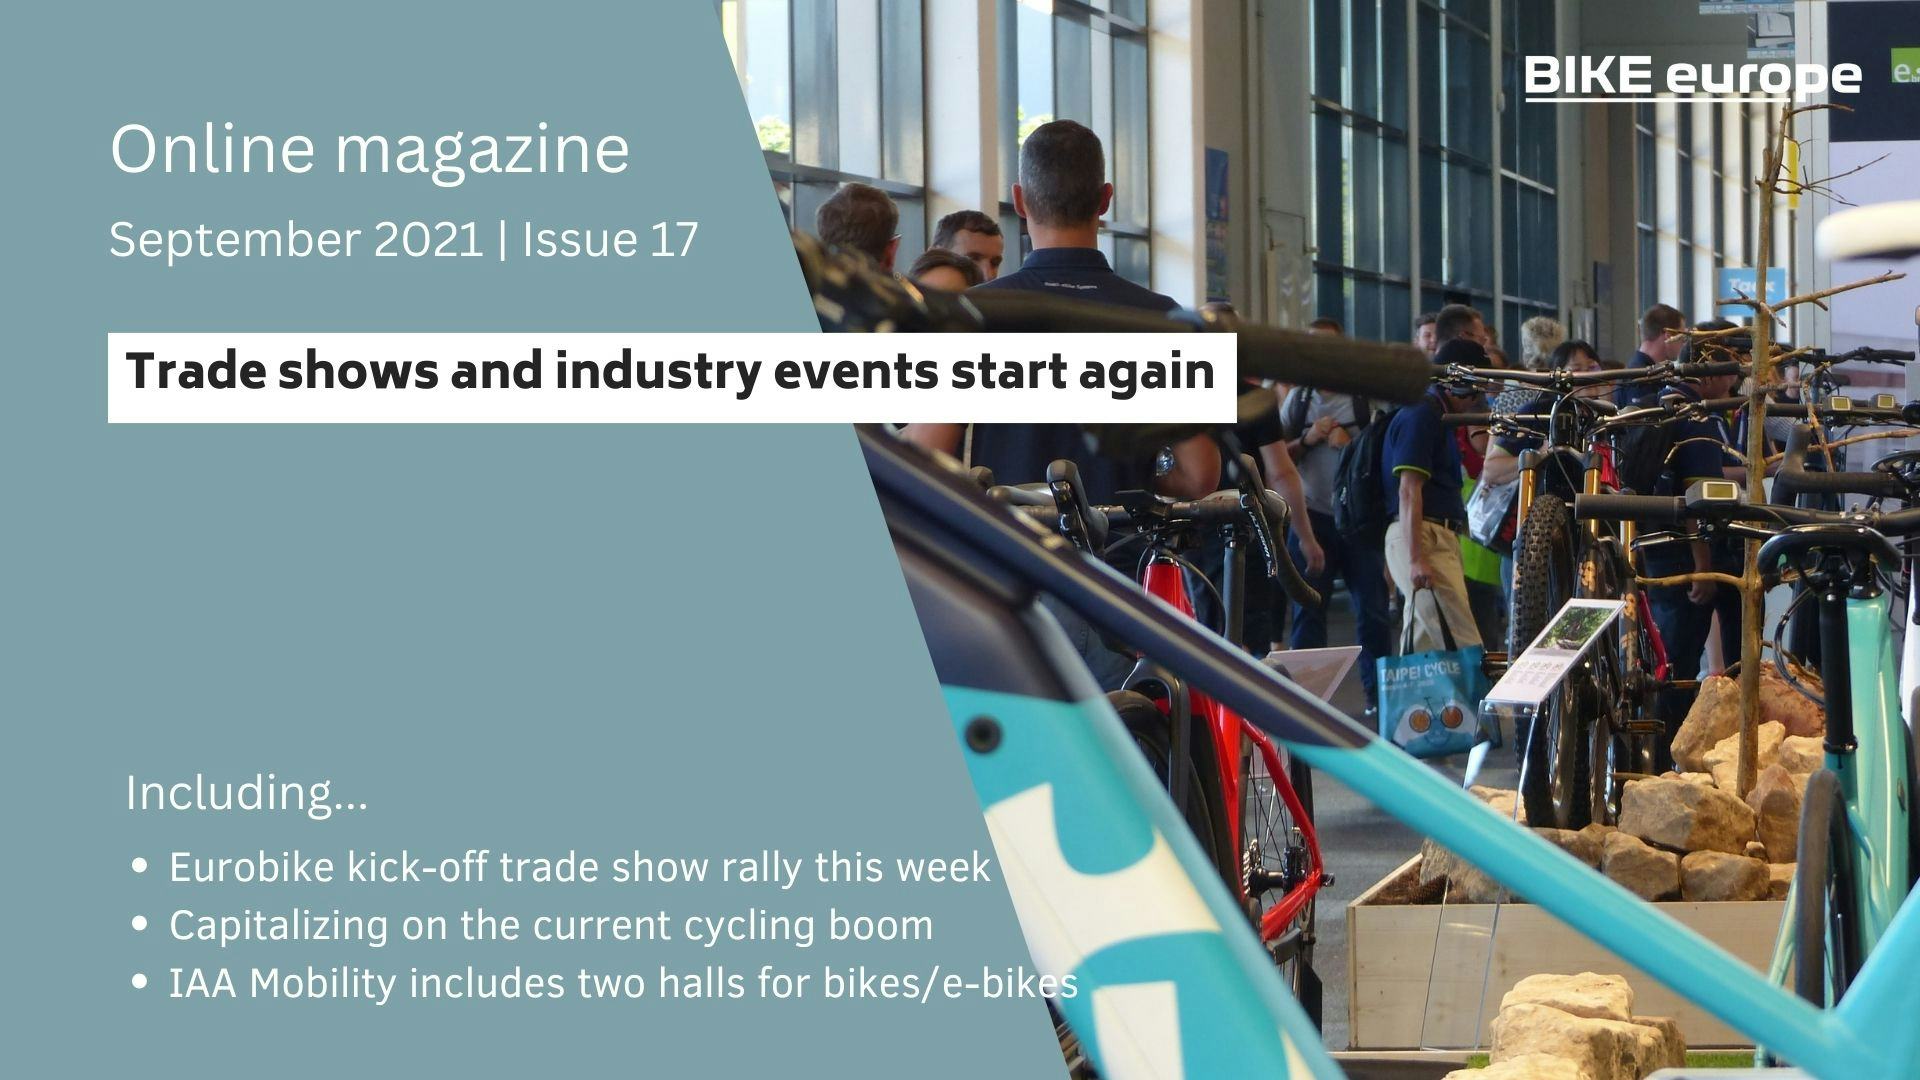 Online Magazine: Trade shows and industry events start again 